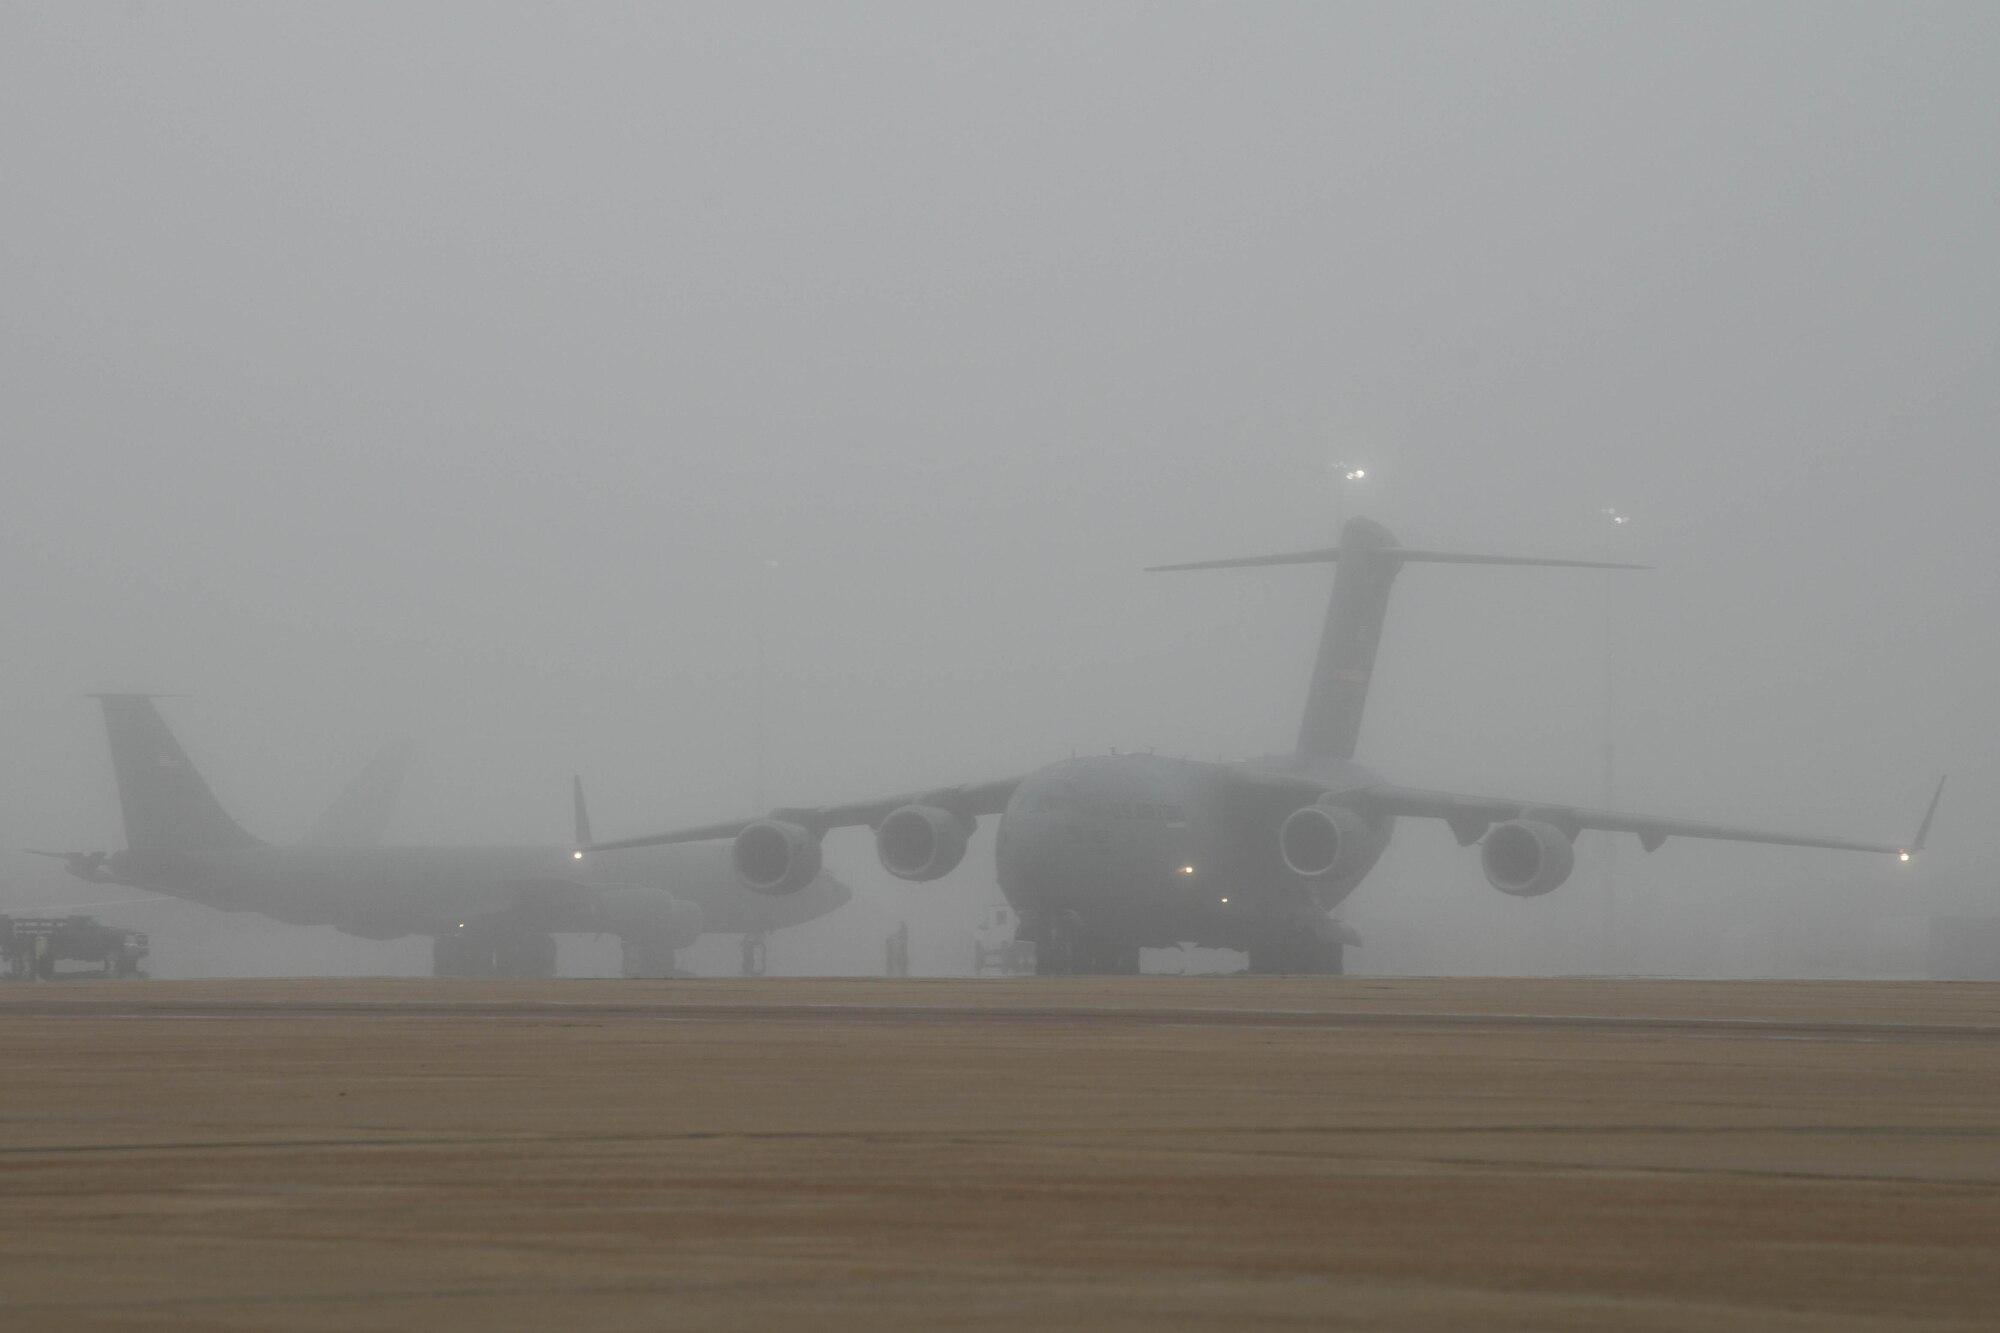 A C-17 Globemaster III taxis on the flight line due to incoming severe weather at Altus Air Force Base, Oklahoma, May 4, 2022. U.S. Air Force Col. Blaine Baker, 97th Air Mobility Wing commander, identified three priorities for the severe weather flyaway: preserve safety, preserve property and recover the mission. (U.S. Air Force photo by Airman 1st Class Trenton Jancze)